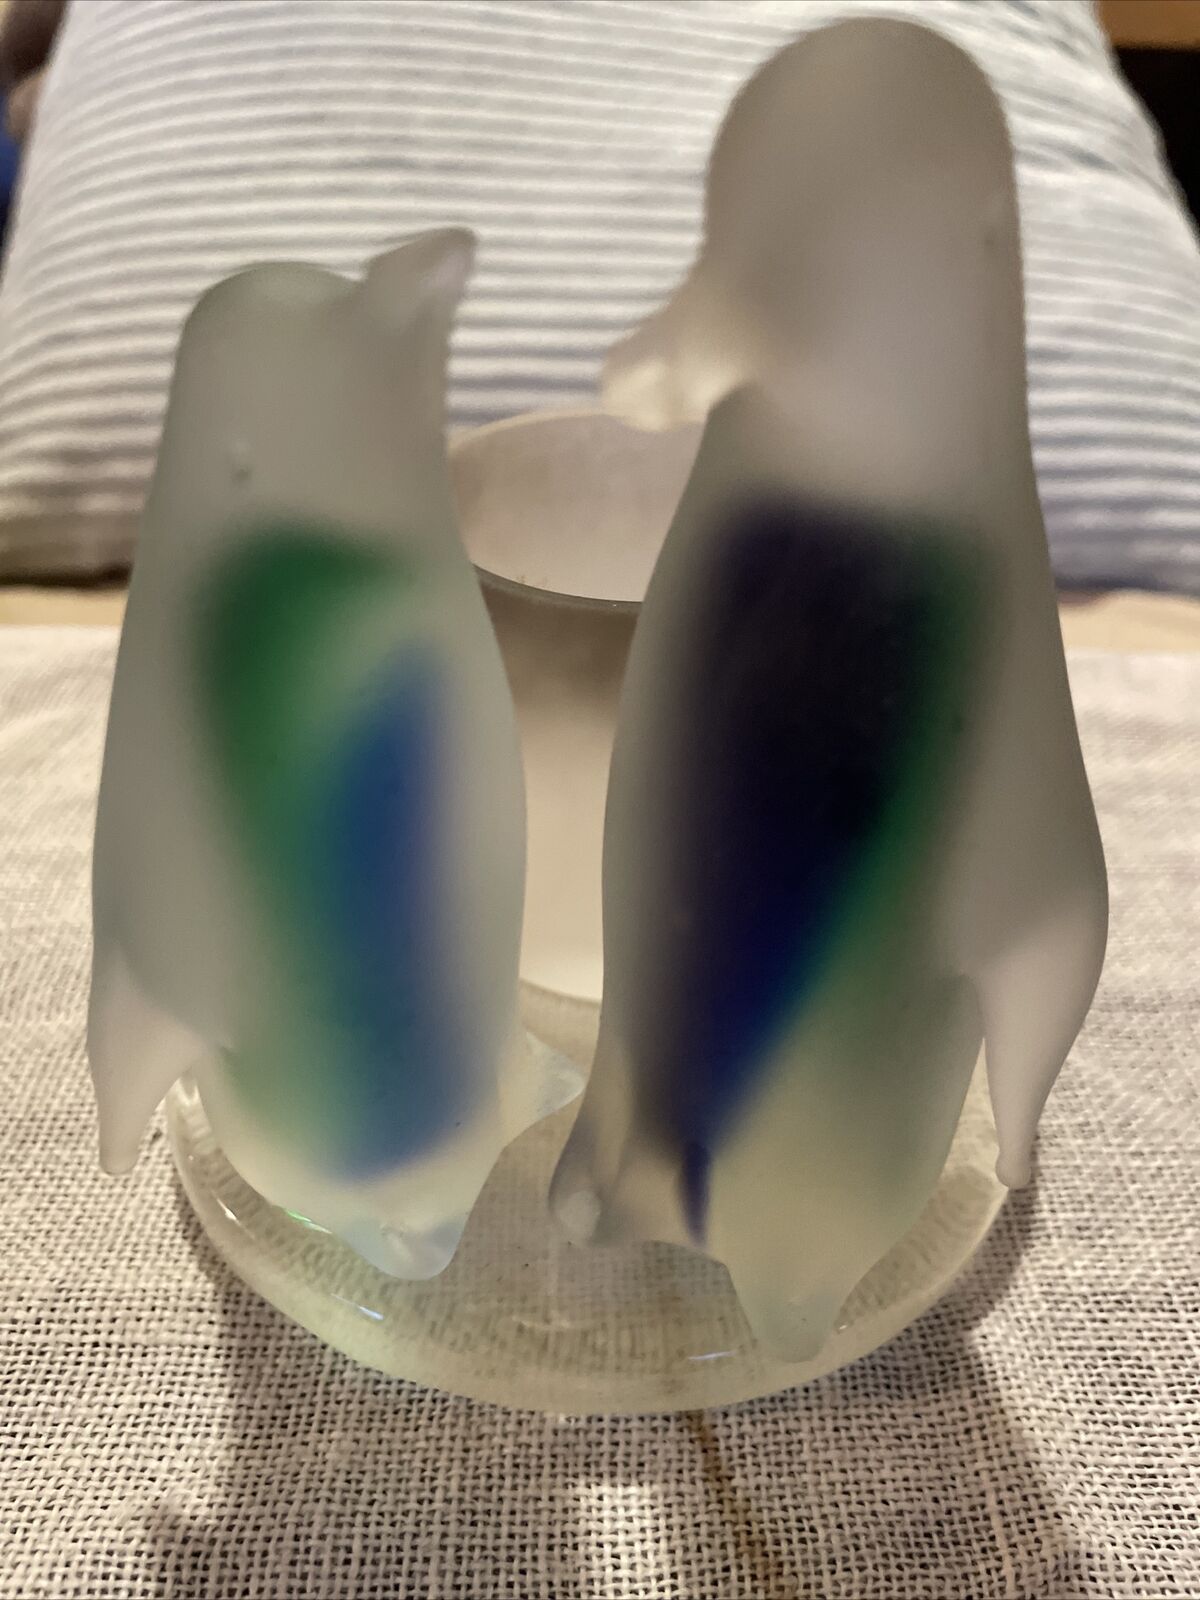 PARTYLITE Frosted Glass PENGUIN VOTIVE CANDLE HOLDER Blue Green 5\